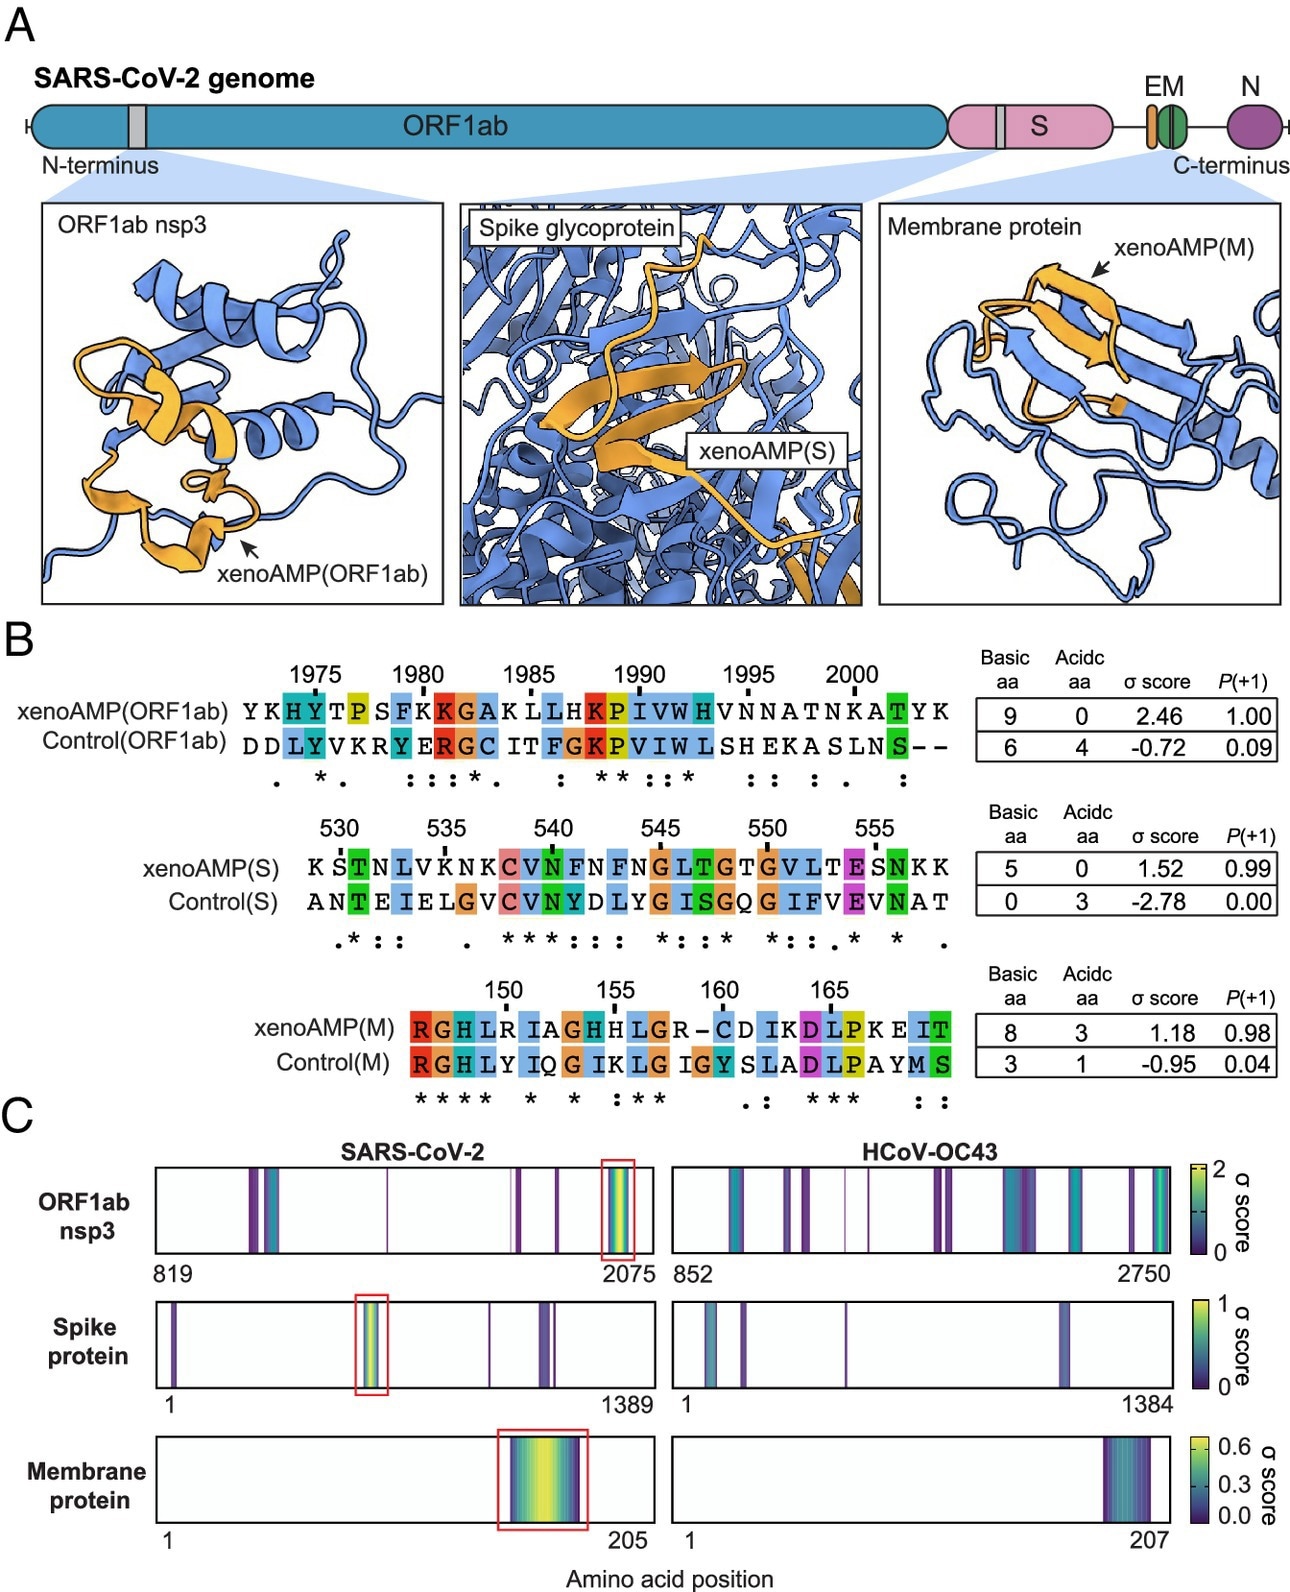 Existence of exogenous mimics of pro-inflammatory host antimicrobial peptides (xenoAMPs) in SARS-CoV-2 proteins. (A) SARS-CoV-2 proteins are scanned with a machine-learning AMP classifier. Each queried sequence is given a σ score that measures its AMP-ness. Three representative high-scoring sequences are studied: xenoAMP(ORF1ab), xenoAMP(S), and xenoAMP(M). The grey bars mark the location where the corresponding sequences are selected. (B) SARS-CoV-2 sequences are aligned and compared to their homologs in a common cold human coronavirus HCoV-OC43: Control (ORF1ab), Control(S), and Control(M). Asterisks, colons, and periods indicate positions that have fully conserved residues, those that have strongly similar properties, and those that have weakly similar properties, respectively. Color is assigned to each residue using the ClustalX scheme. (C) σ score heatmaps compare the distribution of high-scoring sequences in three proteins from SARS-CoV-2 and HCoV-OC43. The first amino acid in each sequence is colored according to its average σ score; regions with negative average σ scores (non-AMPs) are colored white. “Hot spot” clusters of high-scoring sequences for SARS-CoV-2 (bright yellow regions bracketed in red boxes) have systematically higher scores and span wider regions of sequence space compared to HCoV-OC43. This trend suggests that hot spots in SARS-CoV-2 can generate higher scoring sequences for a greater diversity of enzymatic cleavage sites than those in HCoV-OC43.